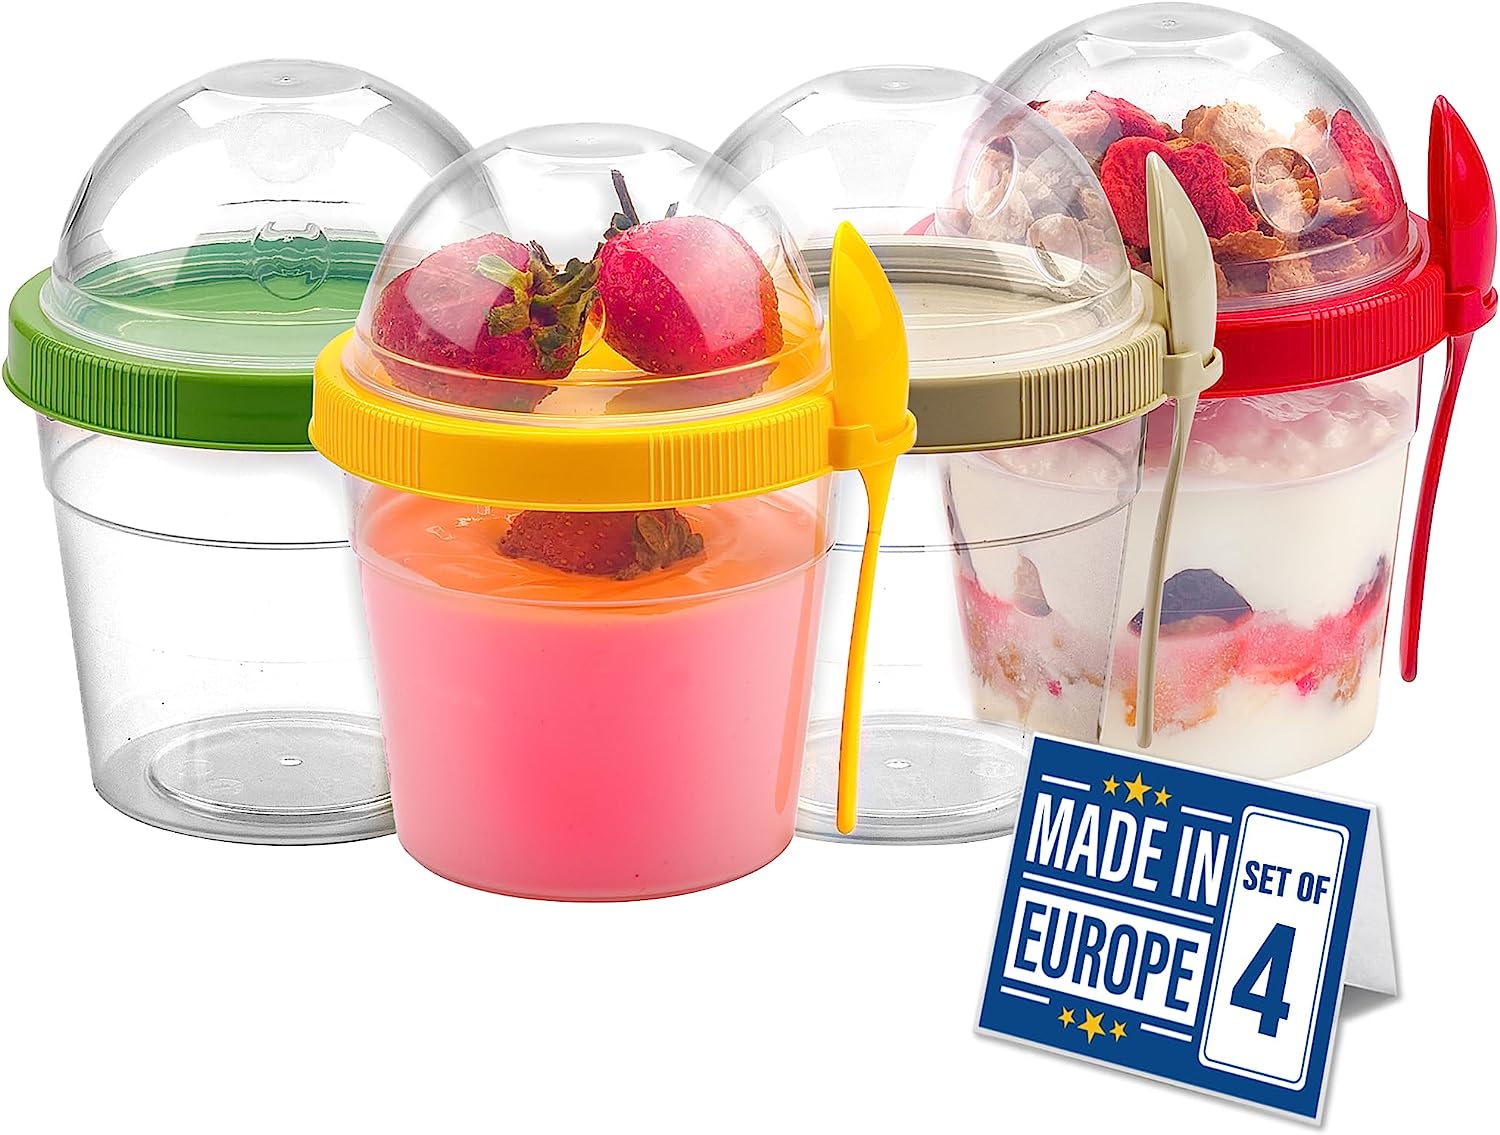 CRYSTALIA Yogurt Parfait Cups with Lids, Mini Breakfast On the Go Plastic Bowls with Topping Cereal Oatmeal or Fruit Container with Spoon for Lunch Snack Box, Reusable, Colorful Set of 4 (Small 17 oz)